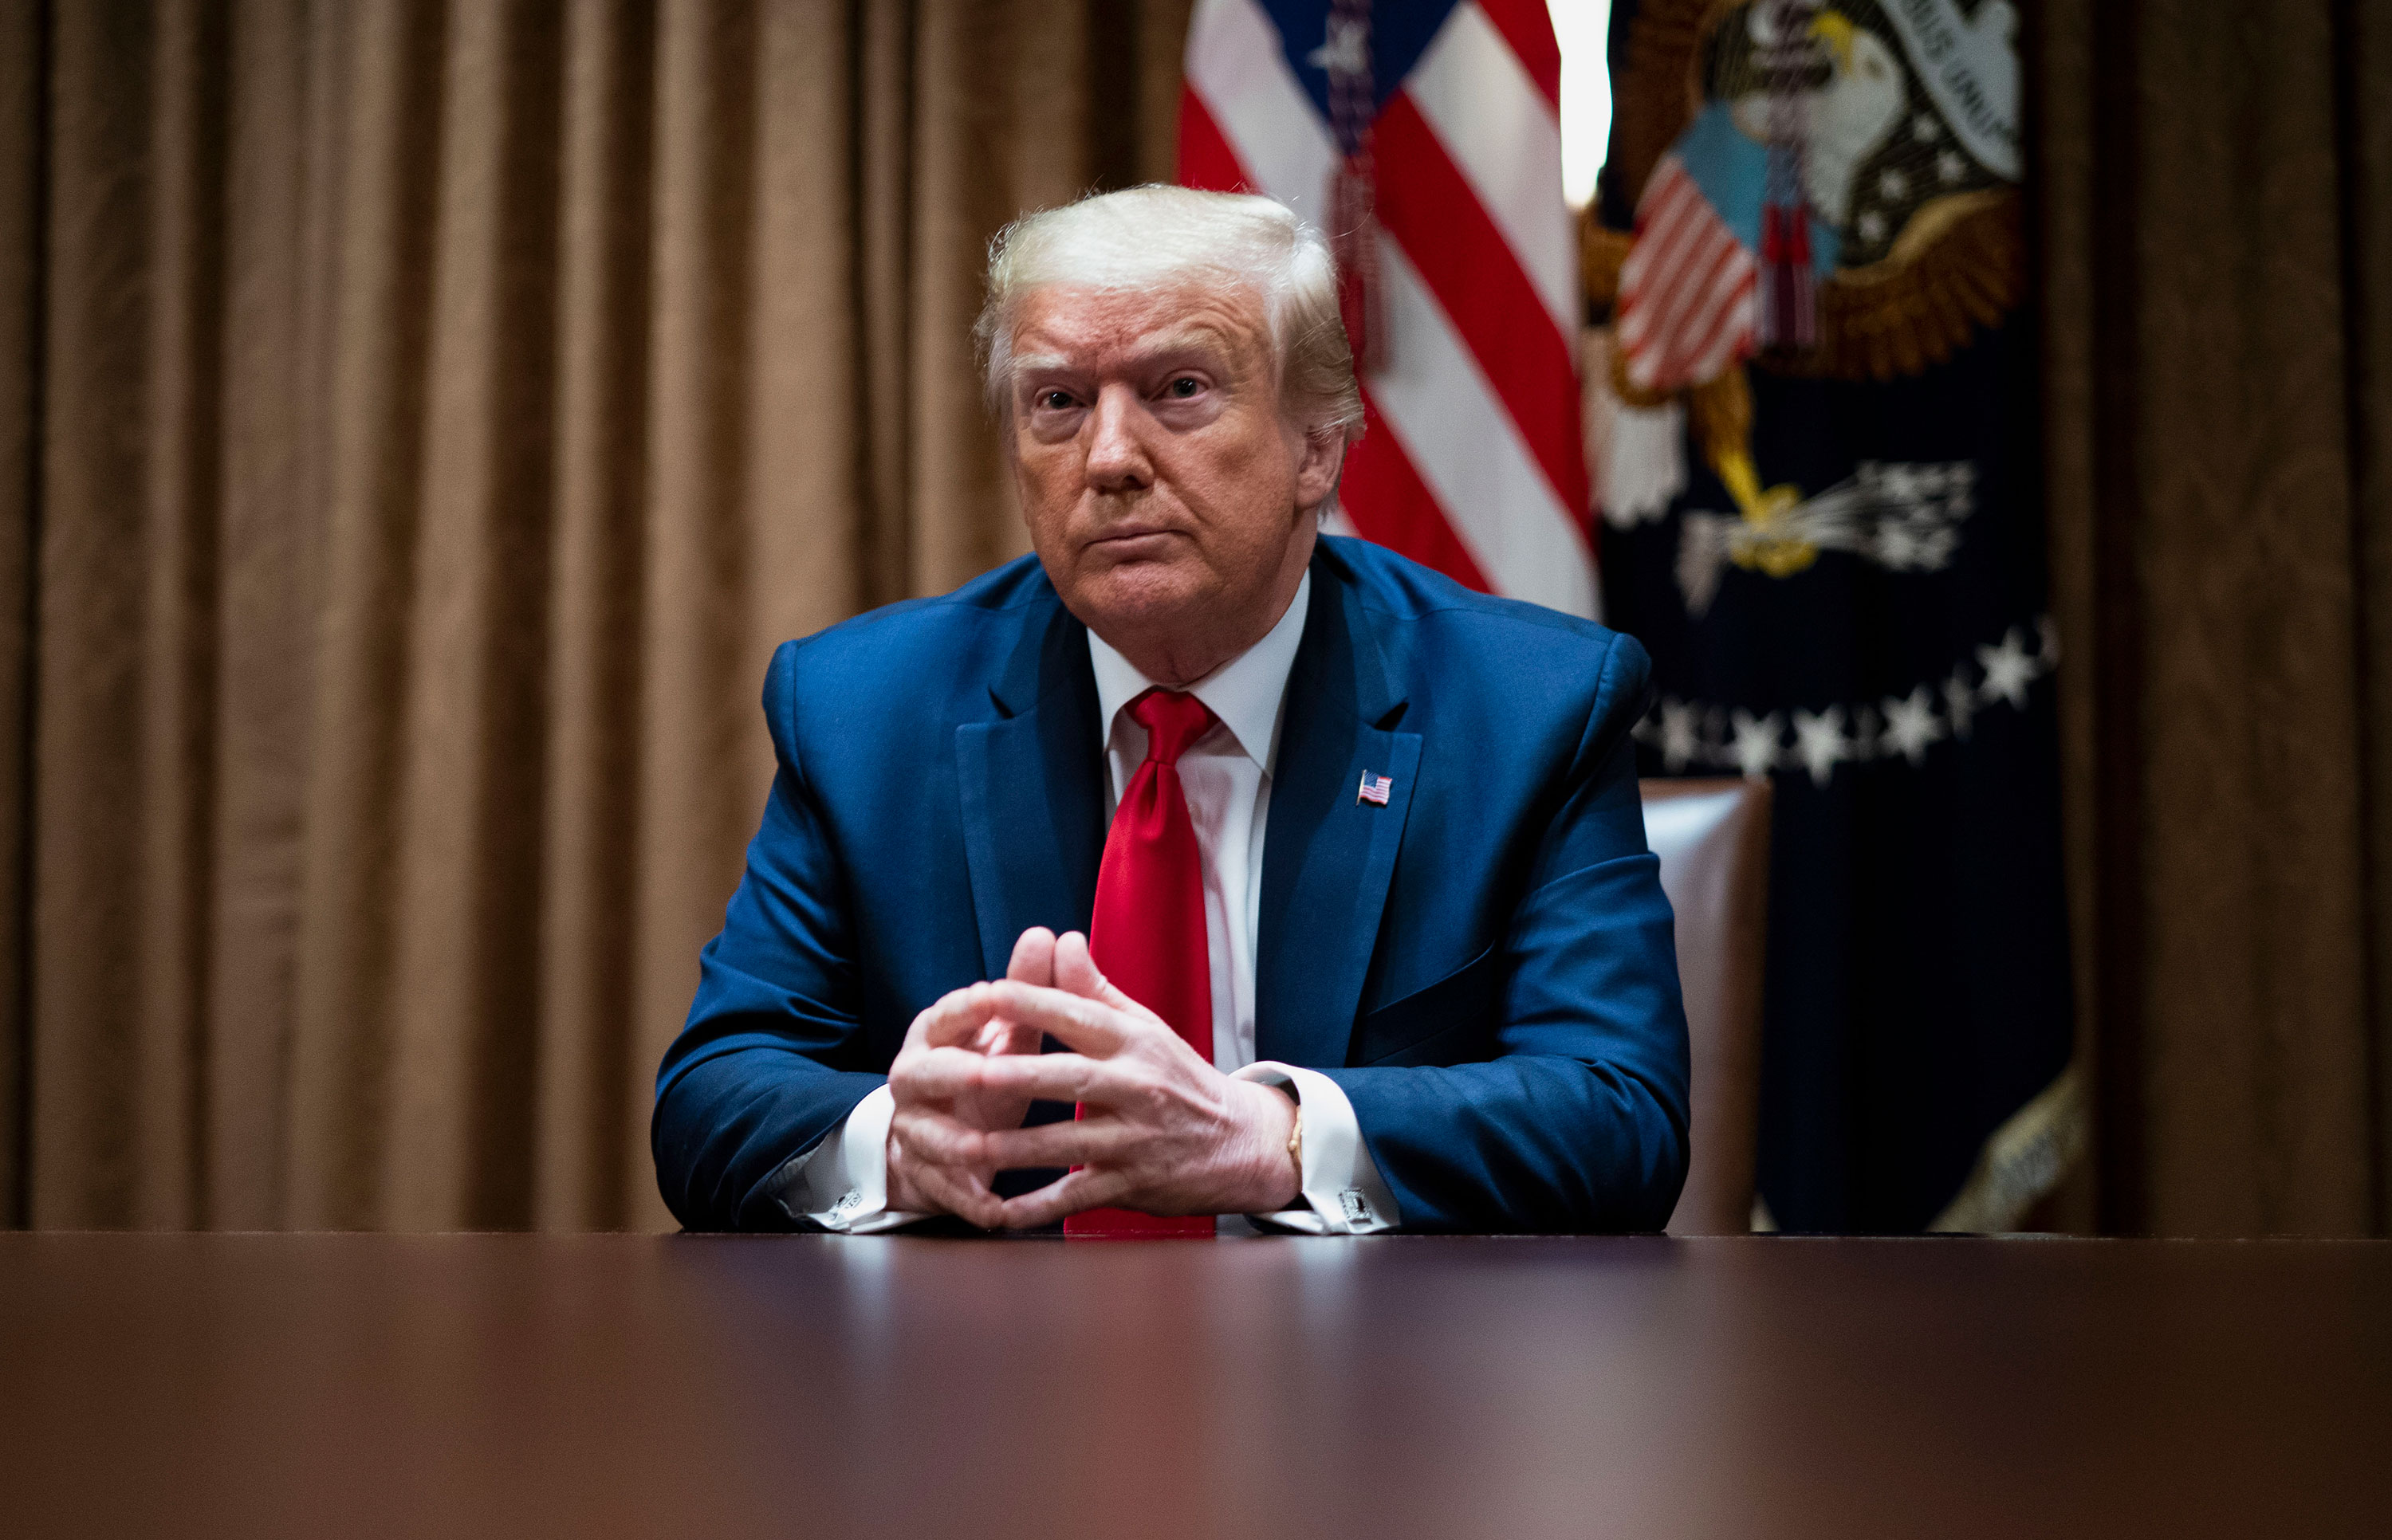 U.S. President Donald Trump holds a meeting at the White House on June 10 in Washington.